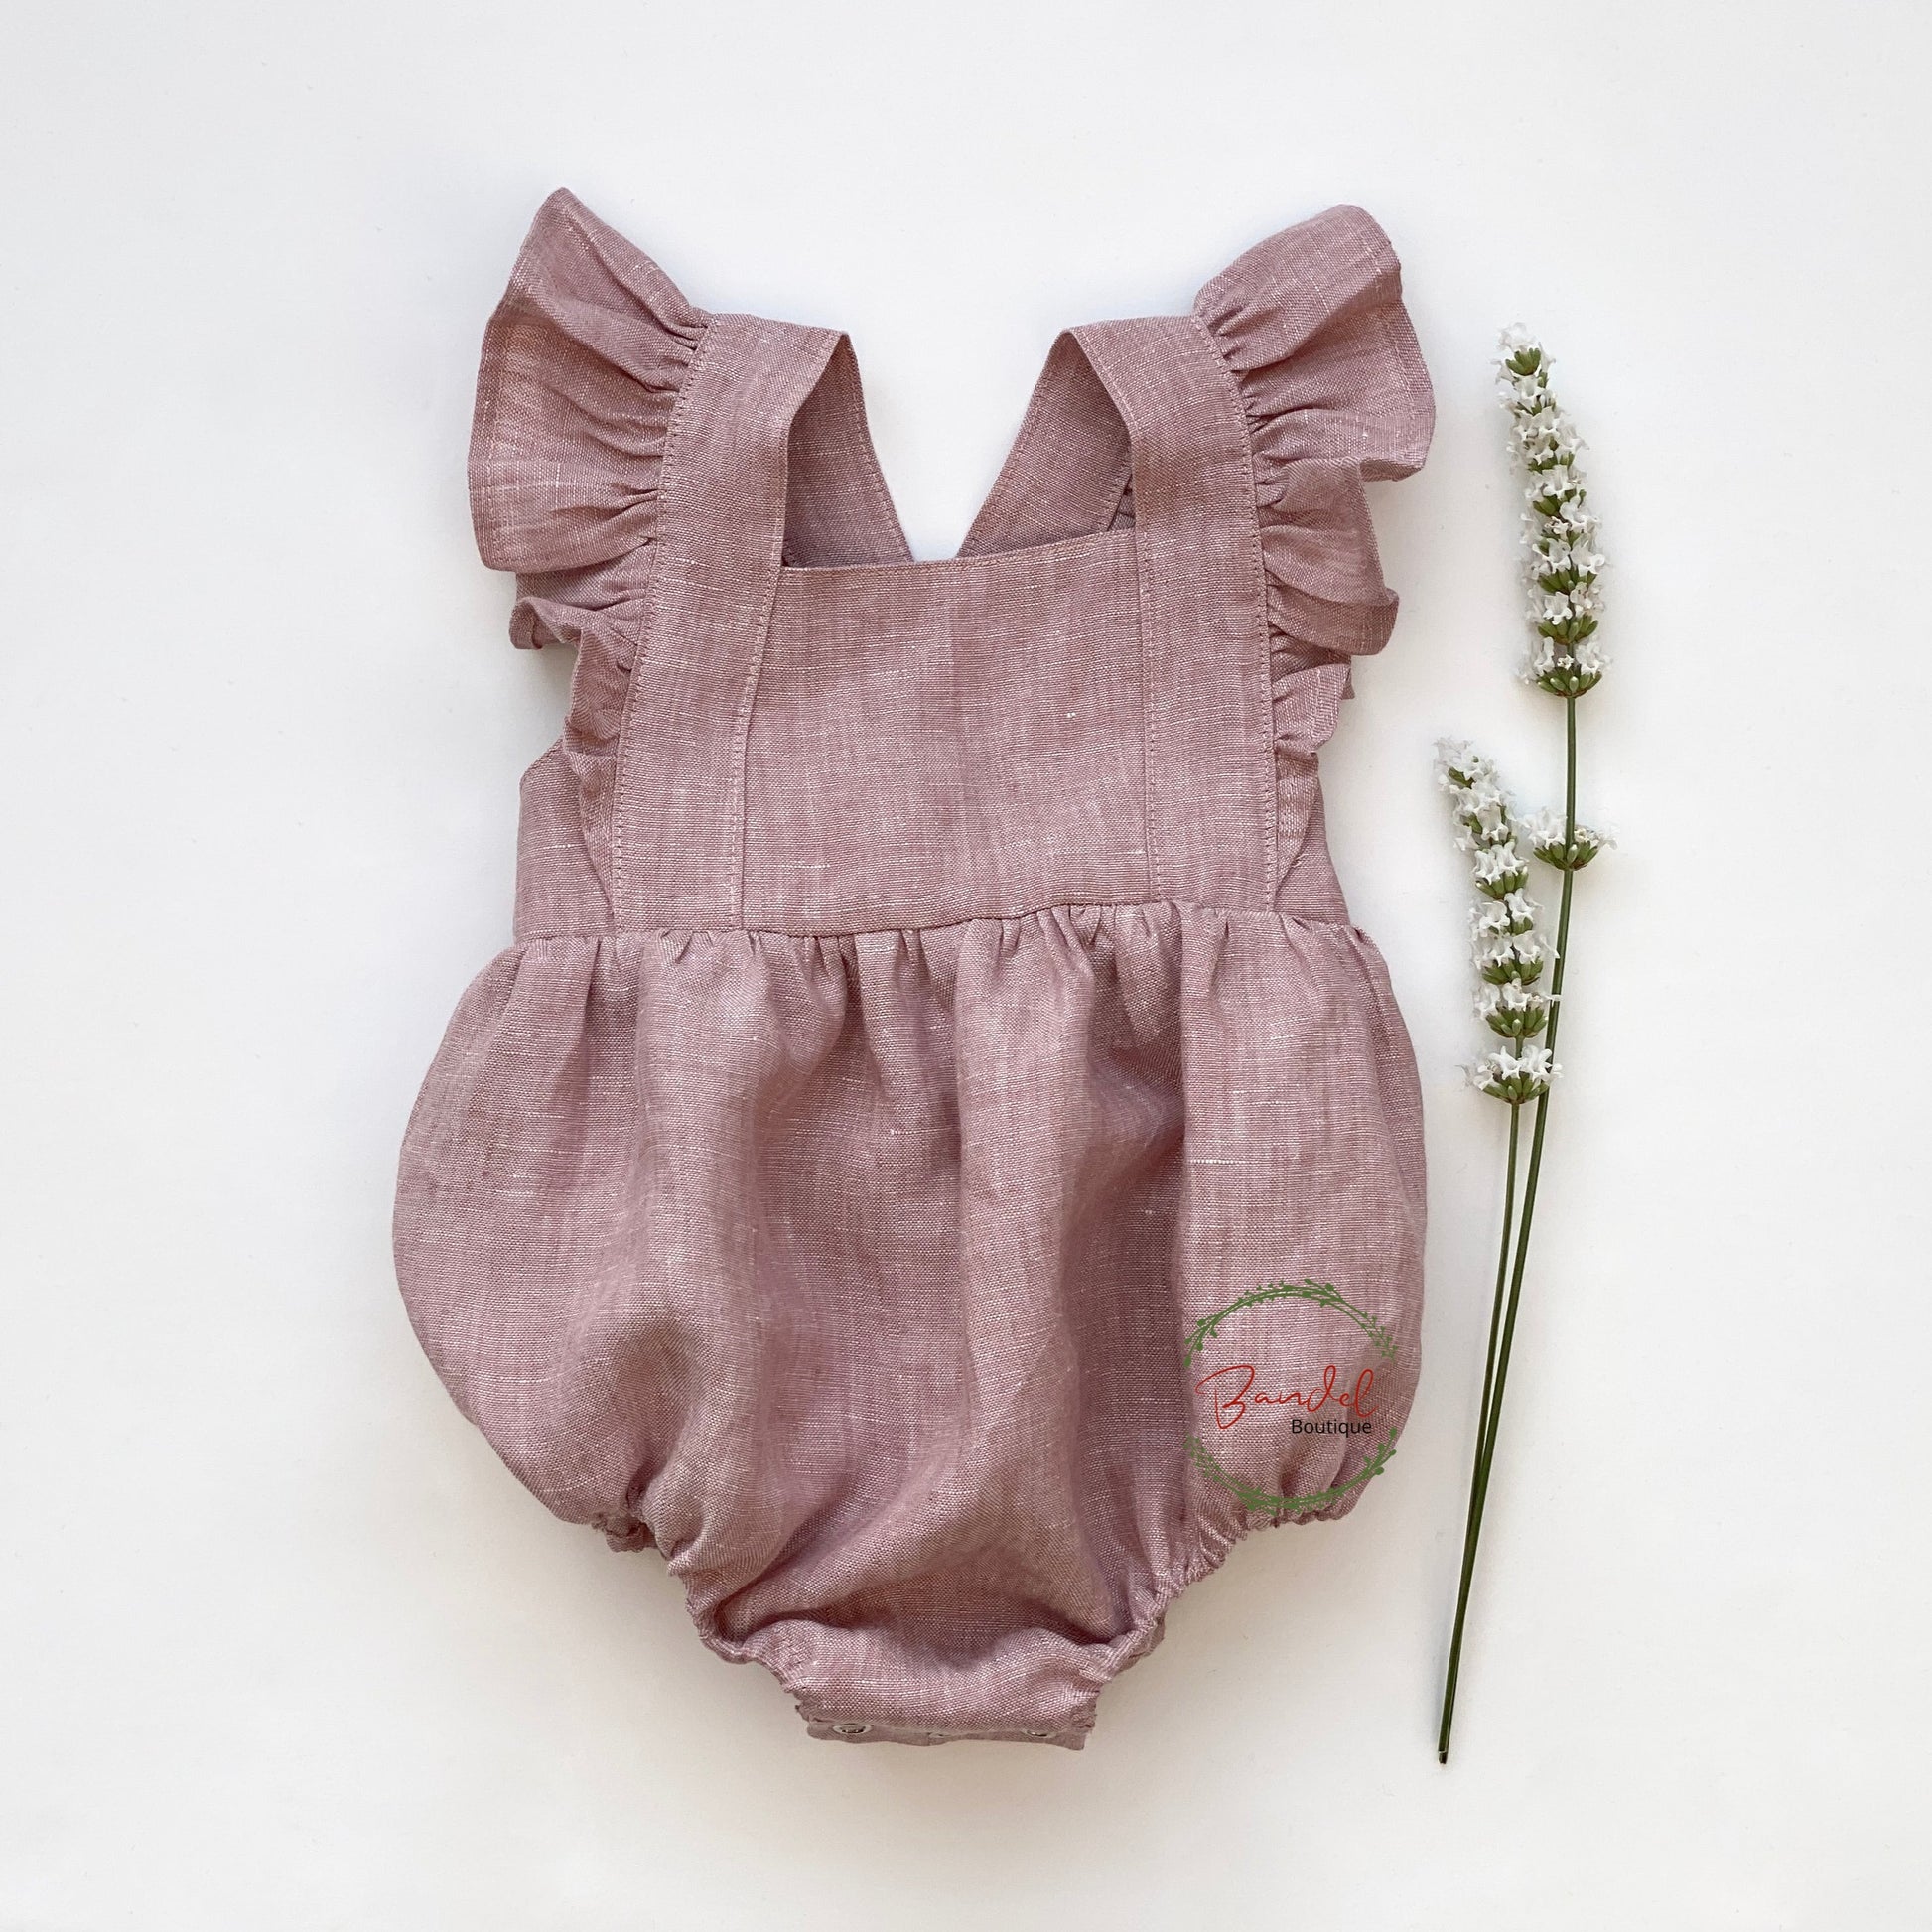 old- rose vintage-inspired Linen Bubble Romper is handmade with care in the Netherlands, making it a unique piece for your baby's wardrobe. This playsuit features sleeve ruffles, elastic at the leg for a comfortable fit, adjustable button straps with two buttonholes, and snaps at the crotch for easy diaper changes.